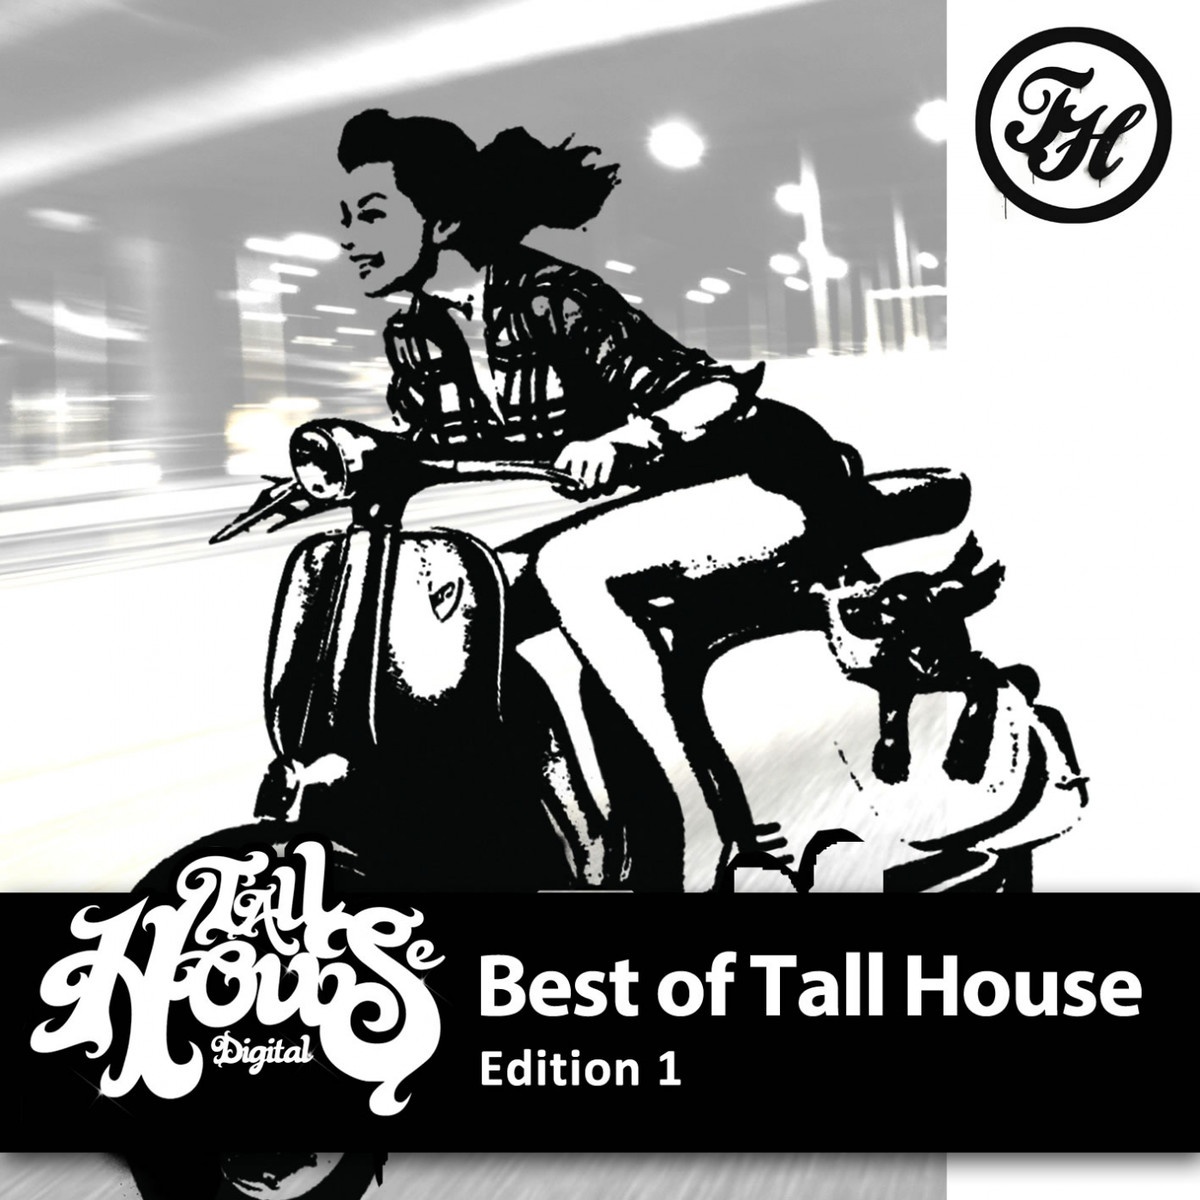 Best of Tall House Edition 1